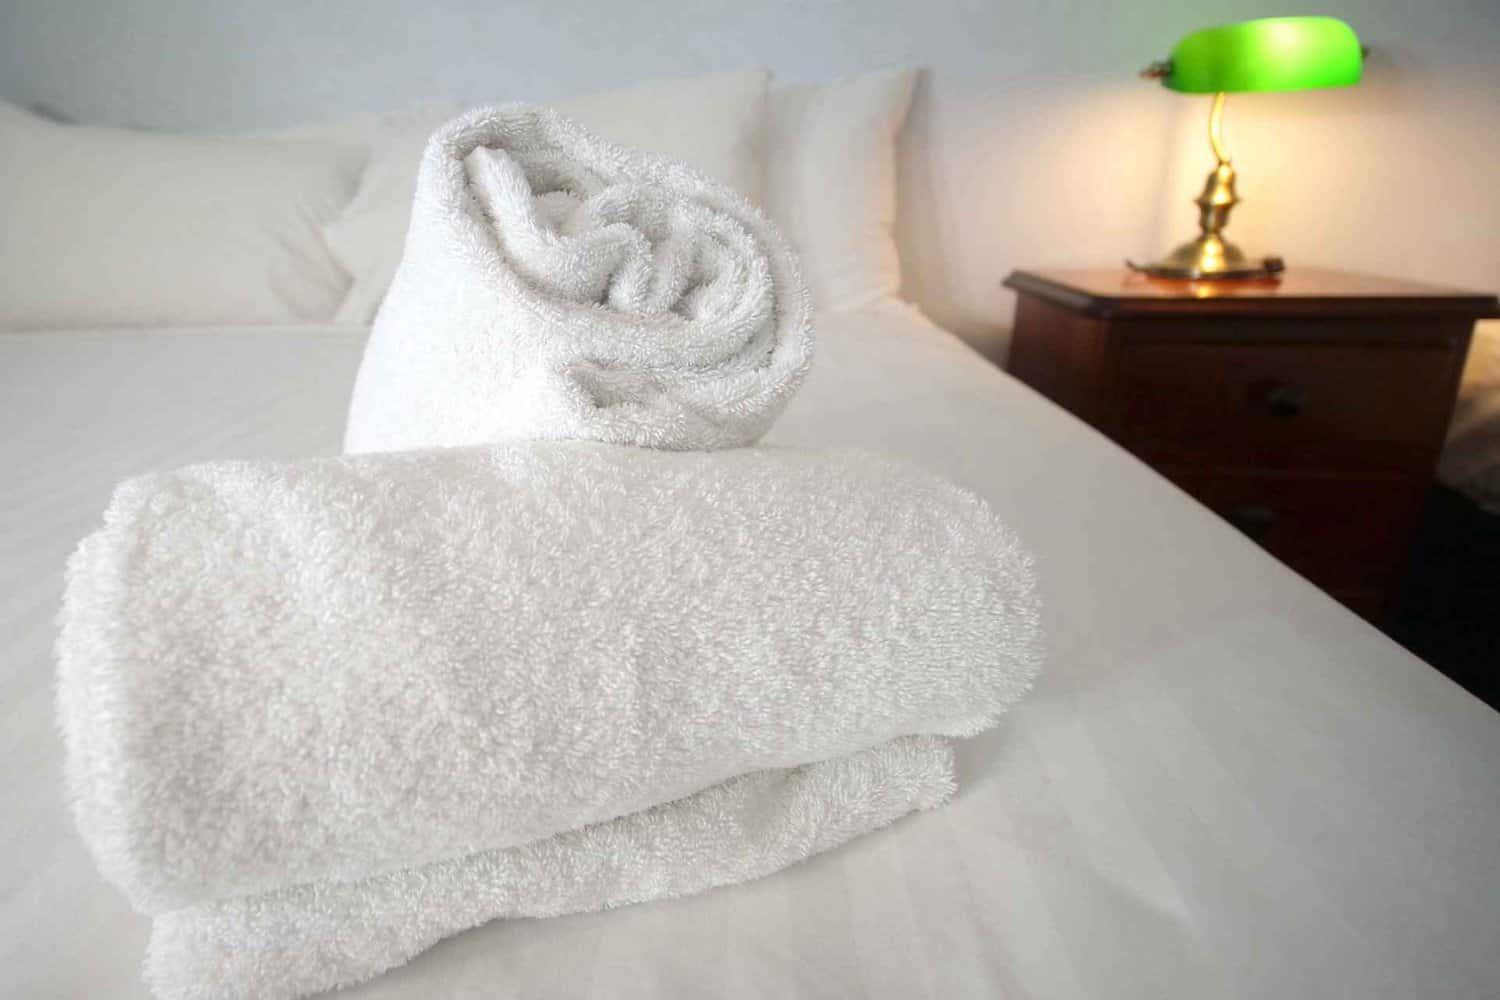 Close-up of fluffy white towels on a hotel bed with crisp linen, with a vintage nightstand and green lampshade in the background, suggesting a cozy and welcoming guest room.